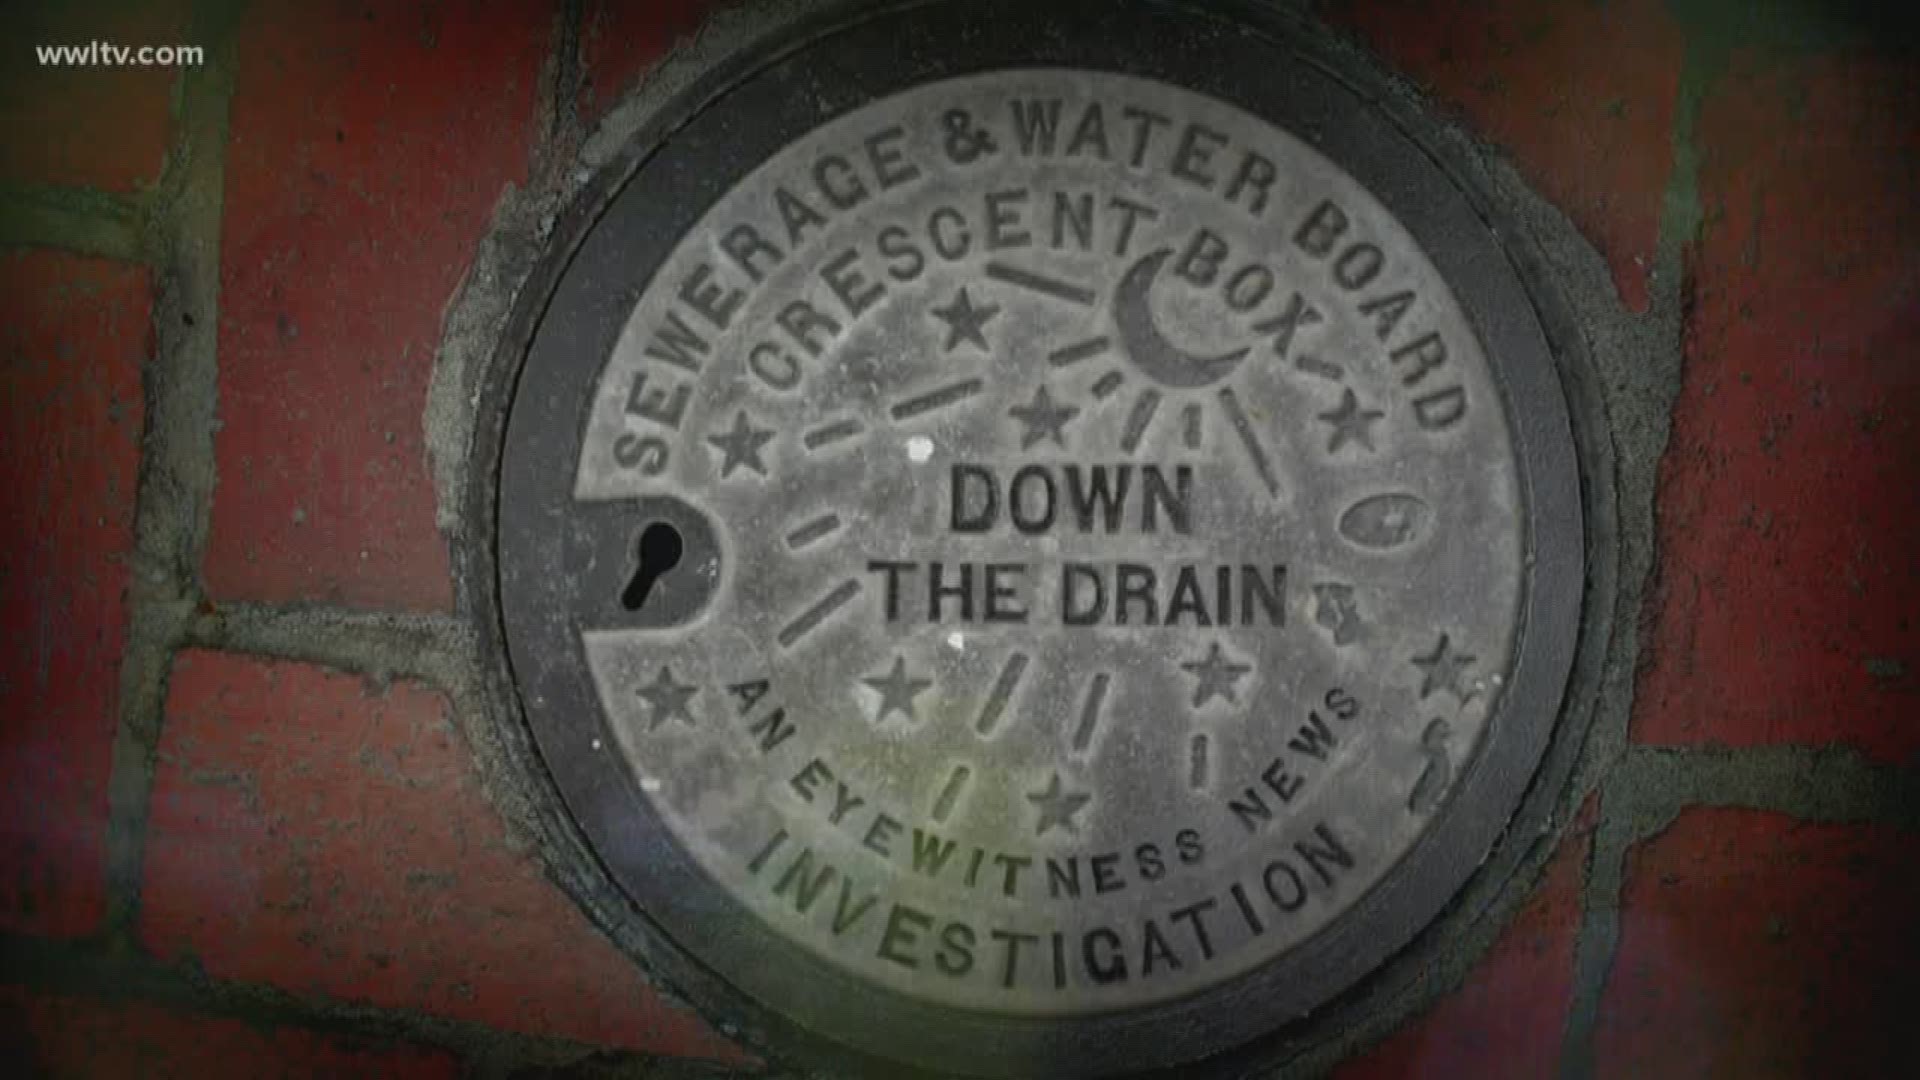 A sneak peak of the Down the Drain special airing Nov. 15 at 6 p.m.